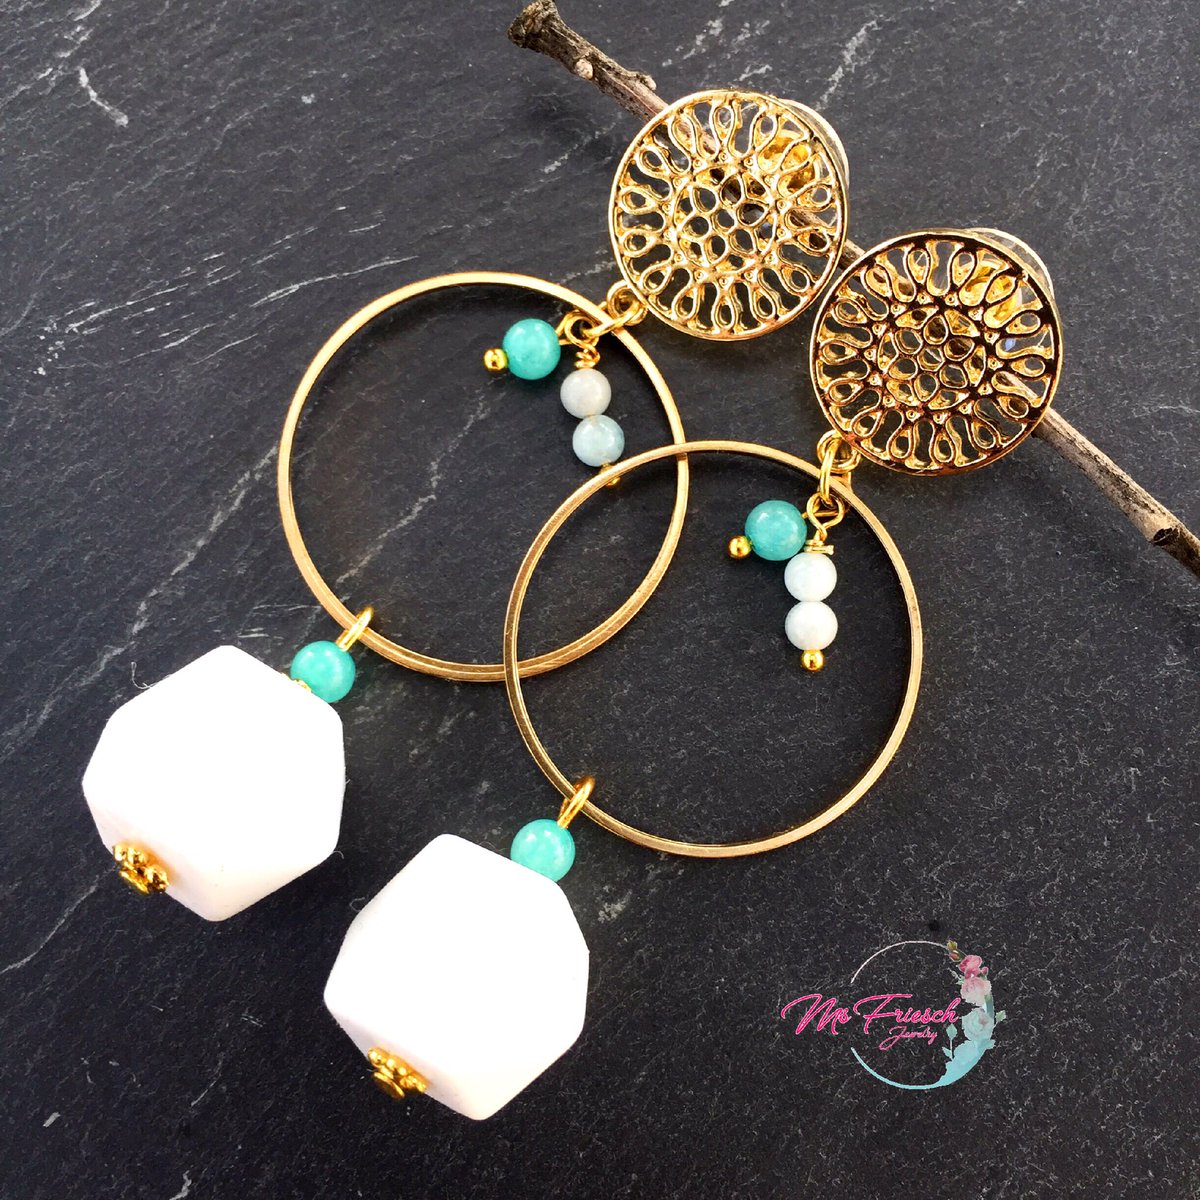 Personalize👉Choose Hexagons Colors.Shop👉msfriesch.com
#msfriesch #msfrieschjewelry #romyfrieschdesigner #jewelry #joyas #pendientes #aros #jewelrydesign #fashionjewelry #holidayearrings #prettyearrings #handcraftedearrings #earrings #goldearrings #cool